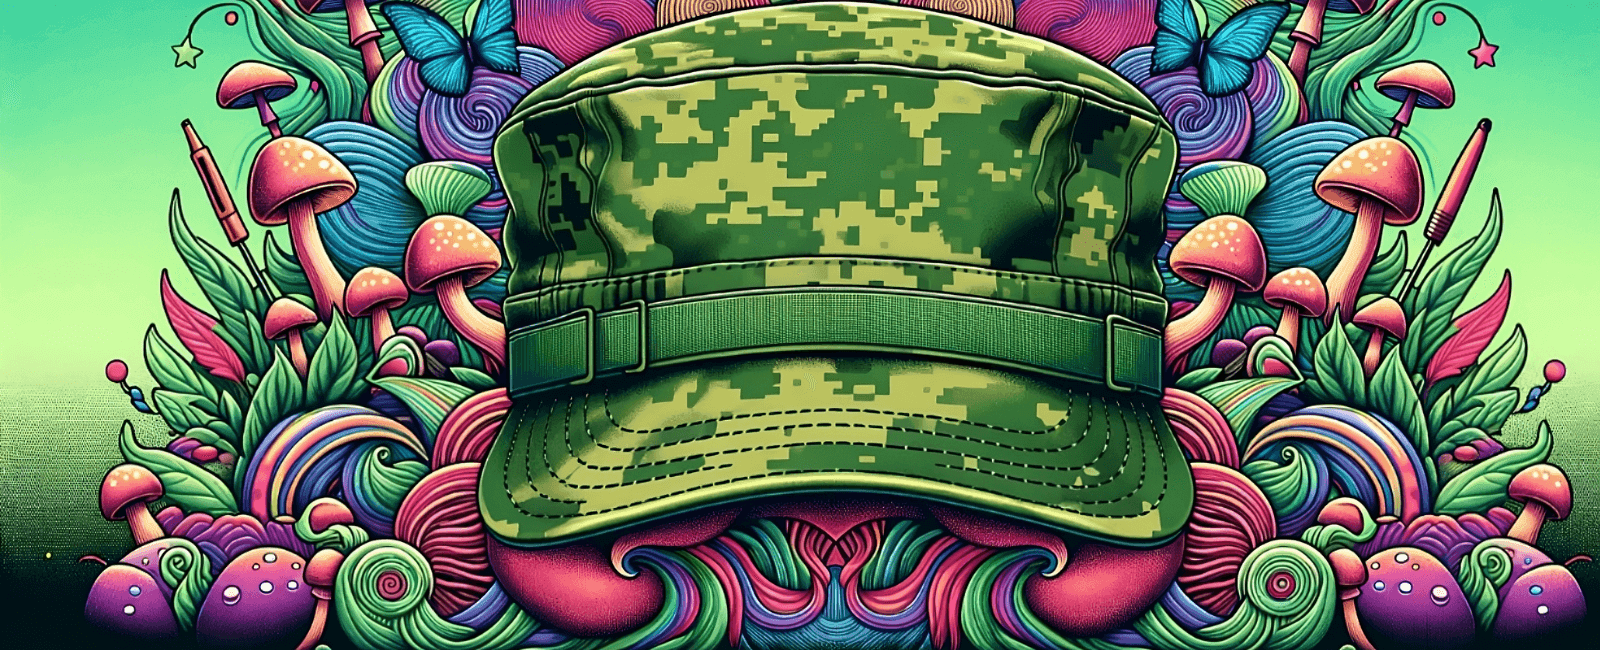 Congress Approves Psychedelic Research Bill for Veterans With PTSD and Traumatic Brain Injuries